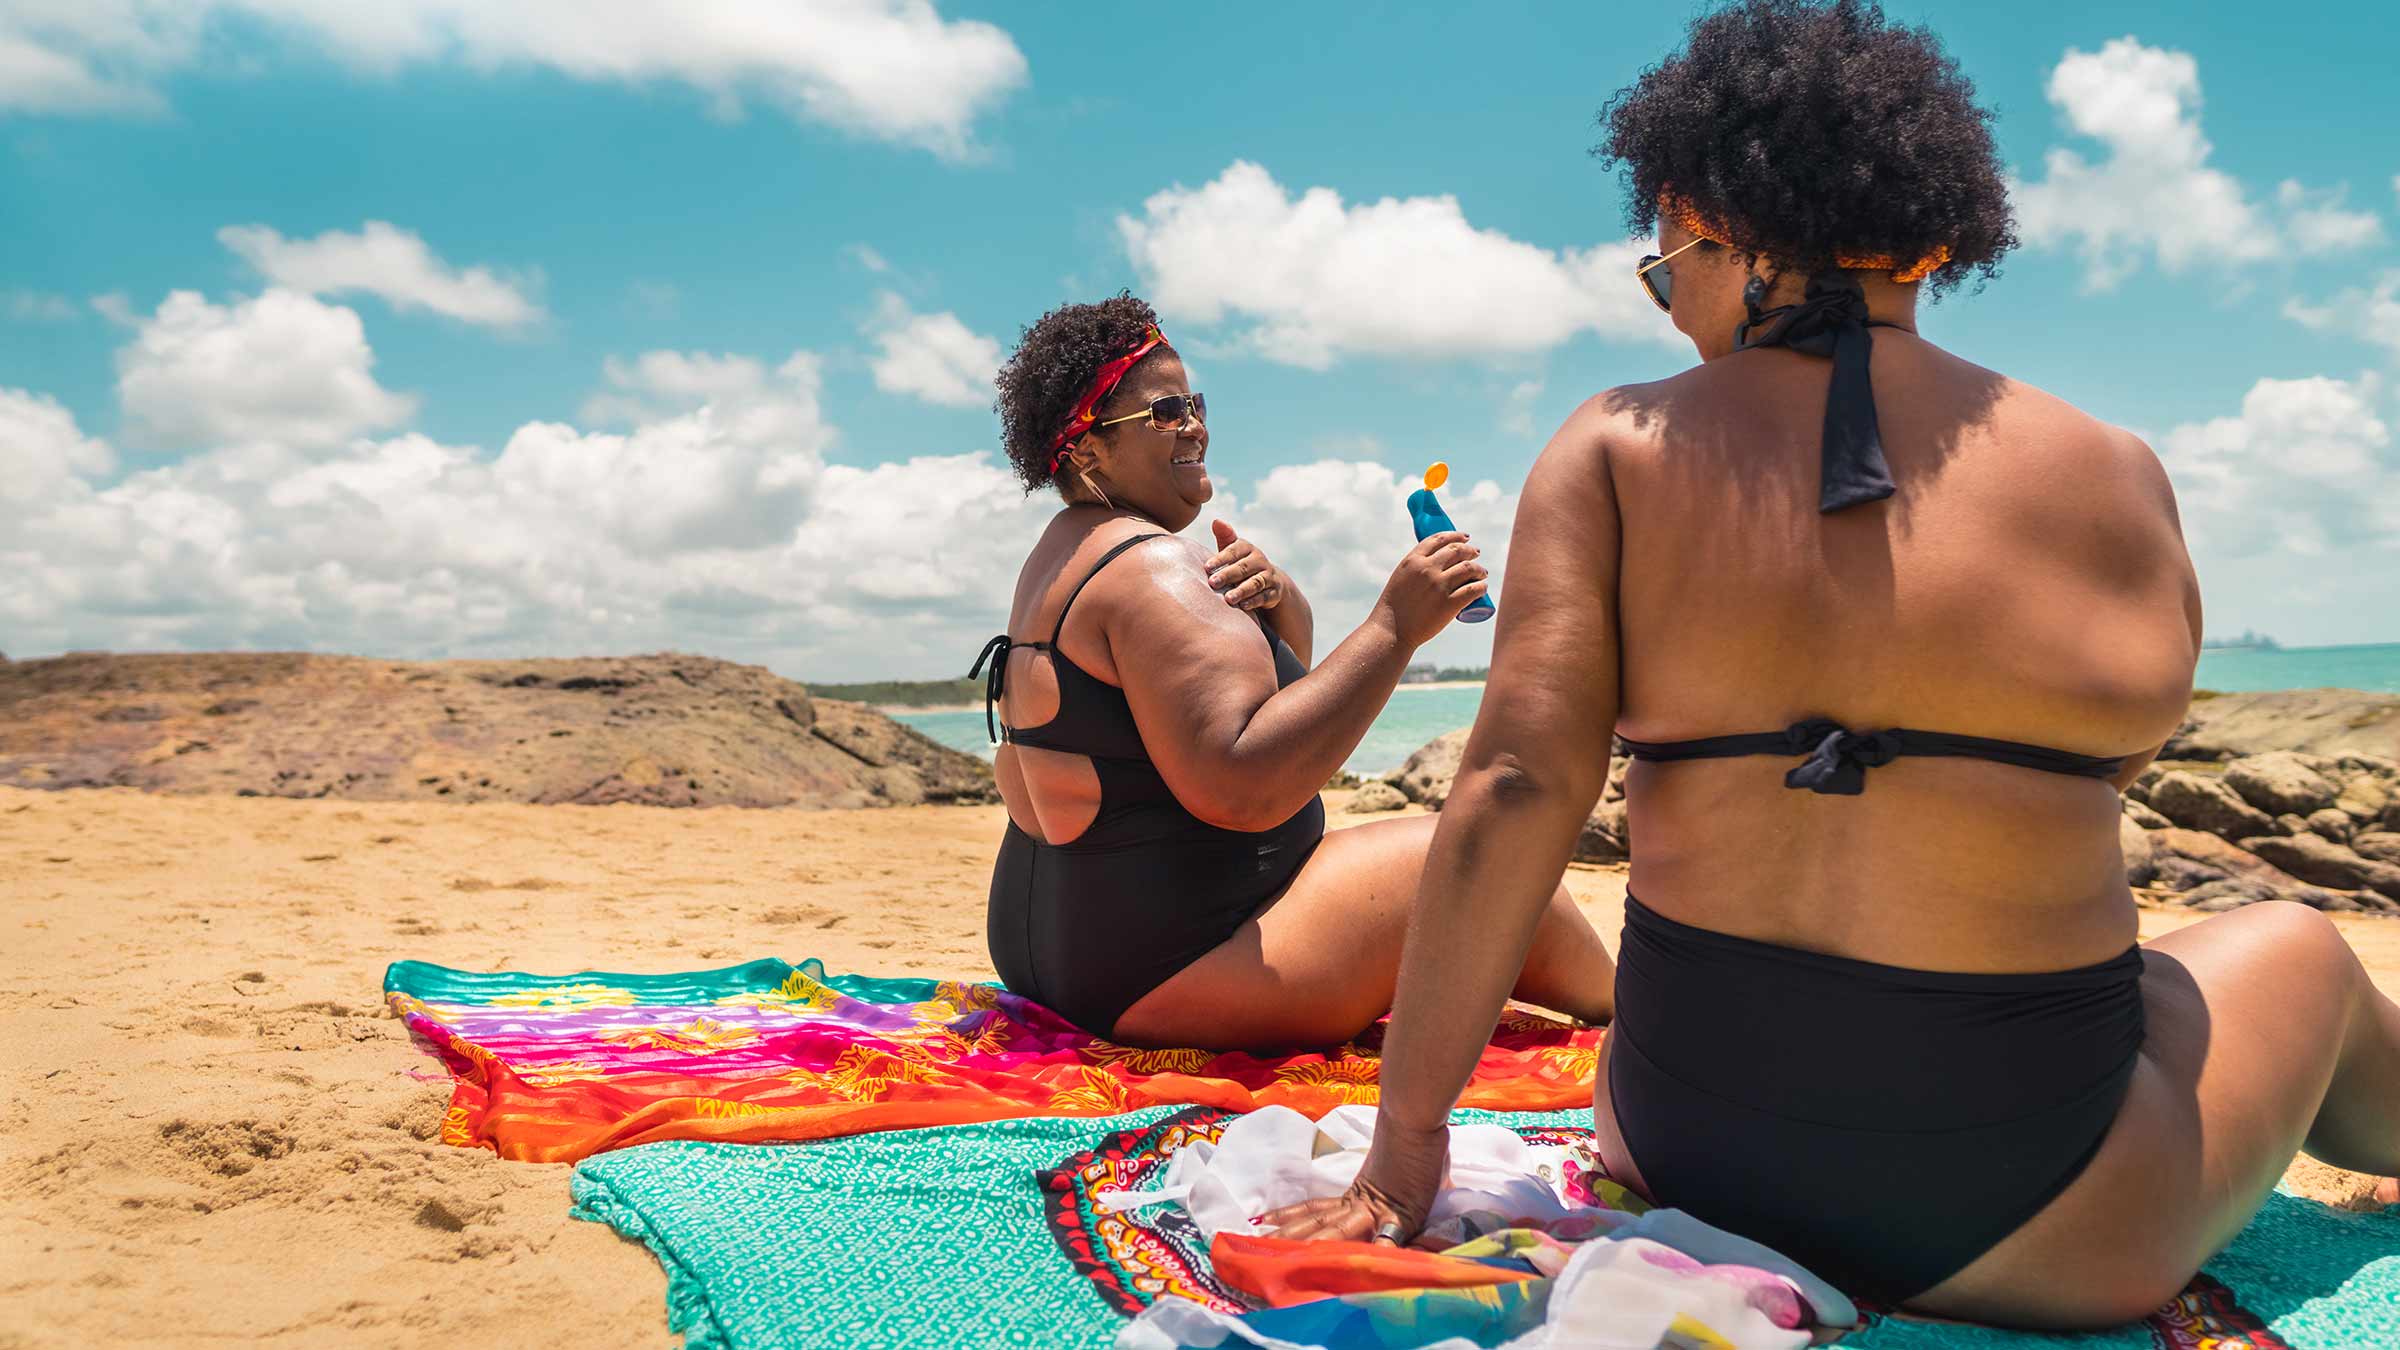 Two women at the beach put on sunscreen